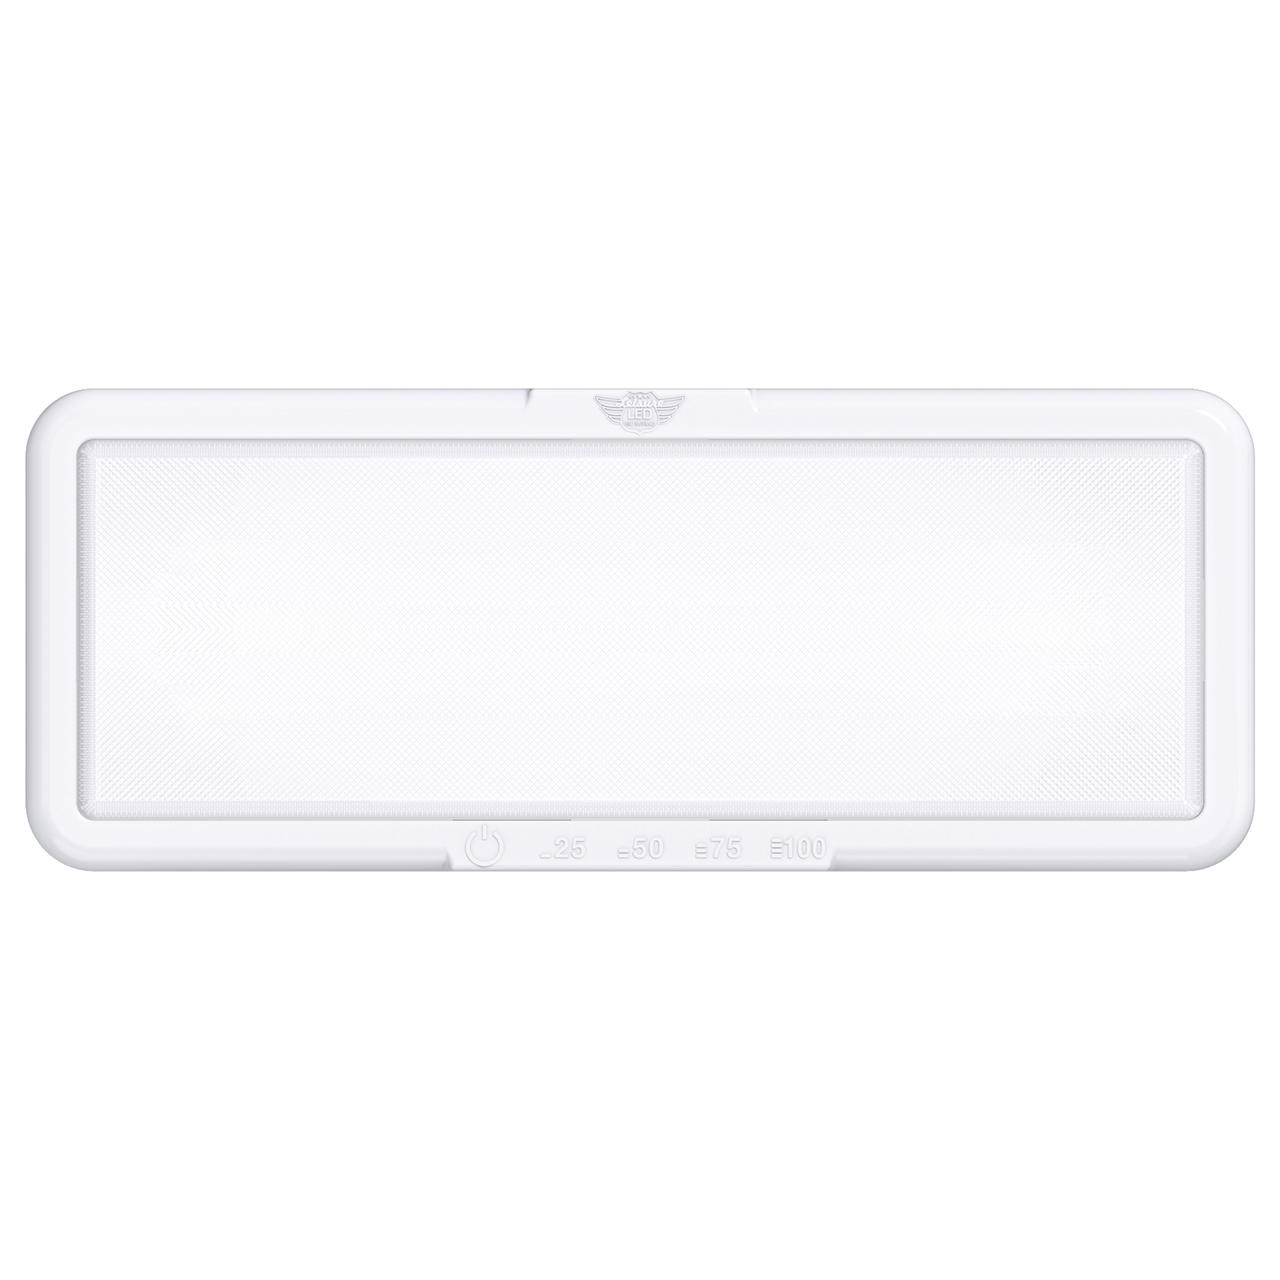 Leisure LED LED RV LED Ceiling Interior Light Fixture 950 Lumen with Touch Dimmer Switch 12V 14 x 5.5 Natural White 4000-4500K With White Trim